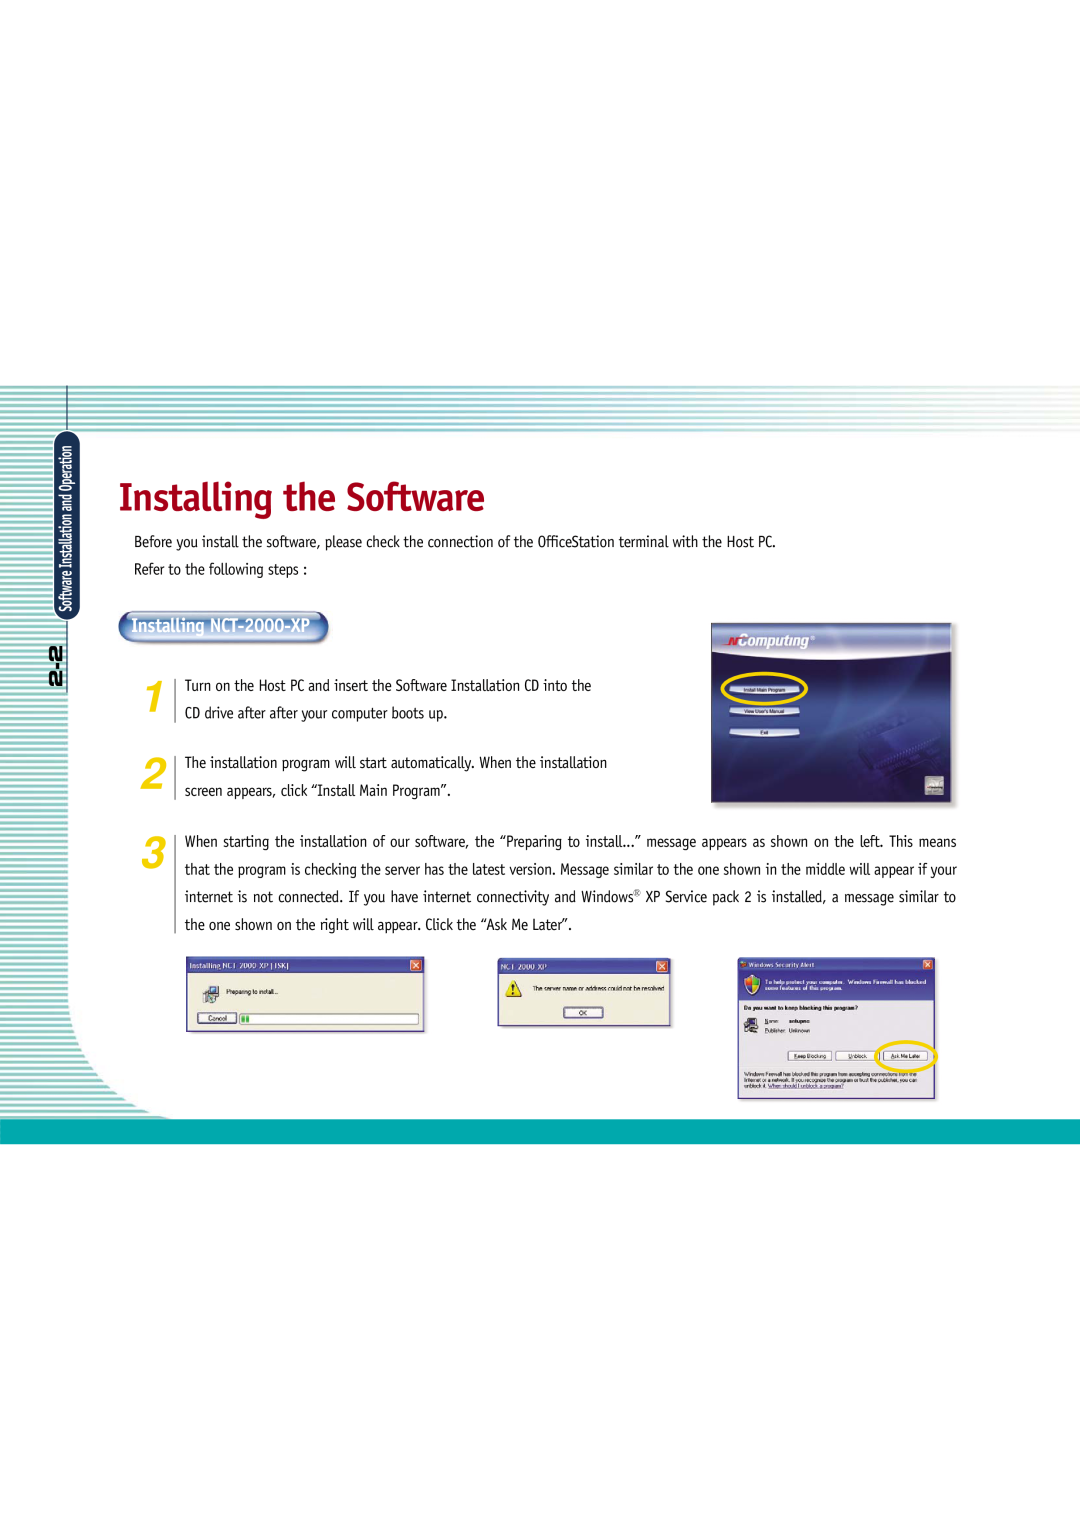 Gateway L110 manual Installing the Software, Installing NCT-2000-XP, Software Installation and Operation 